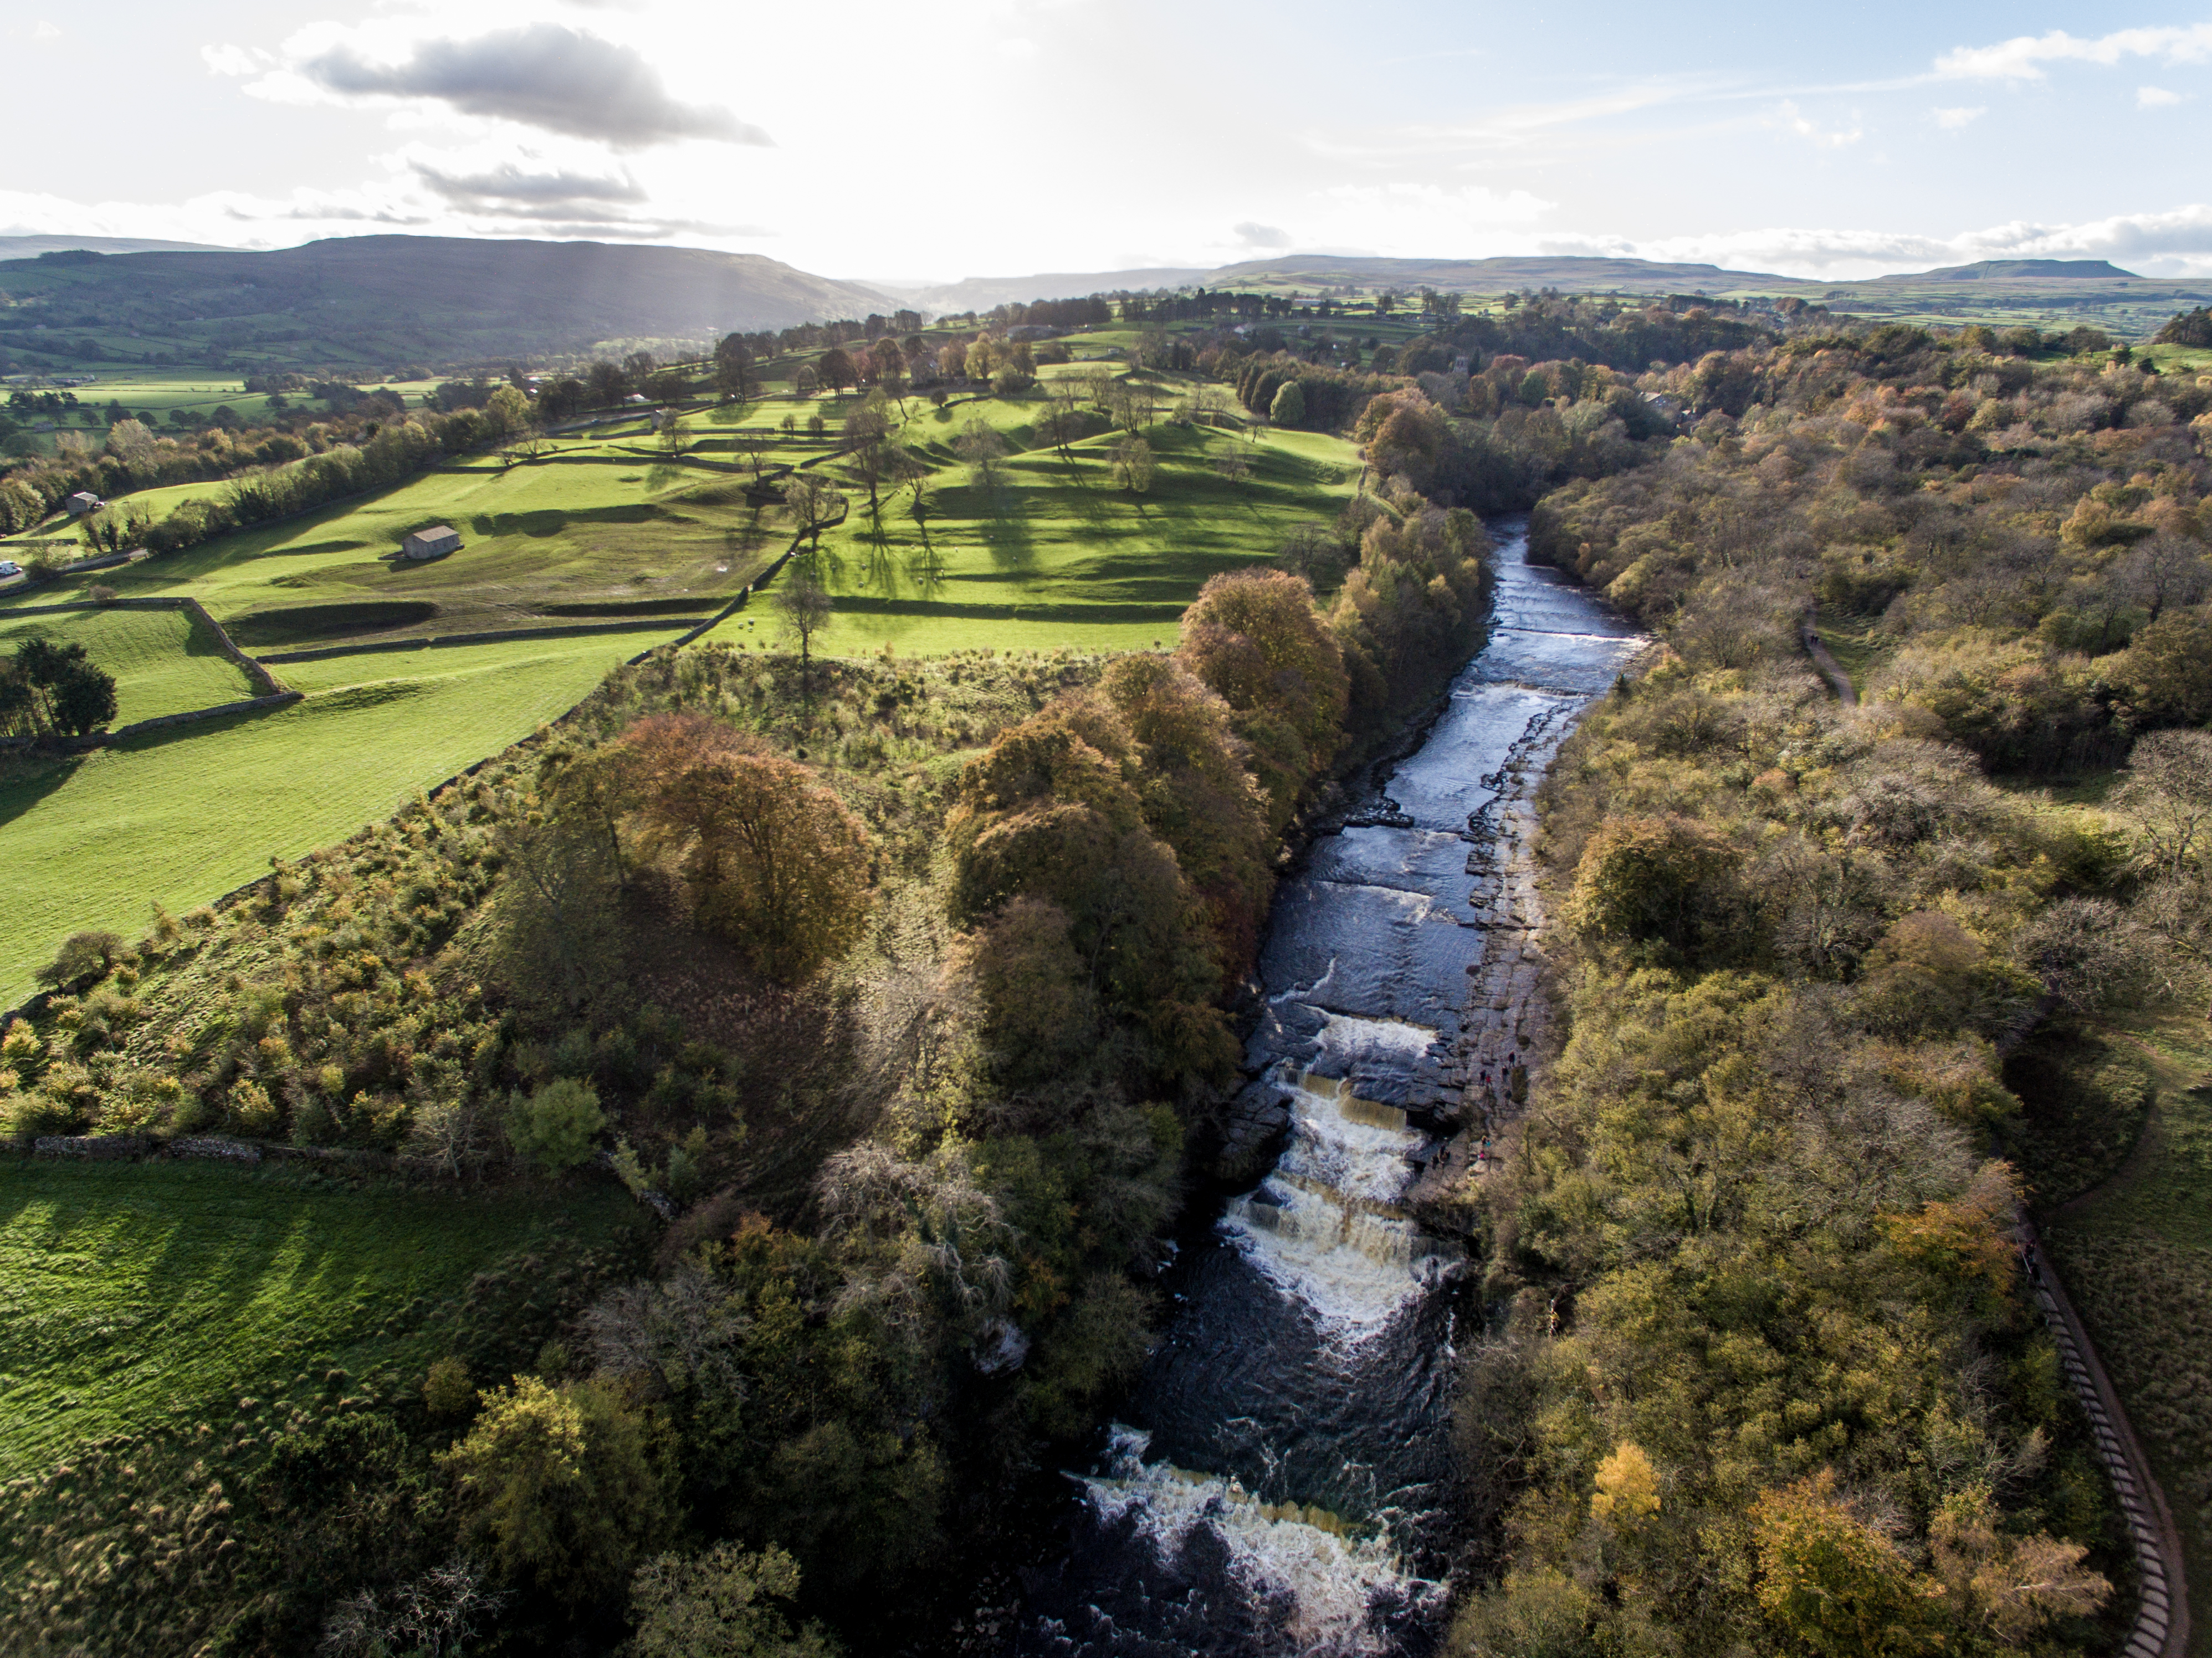 Aerial view of Aysgarth Falls and surrounding area